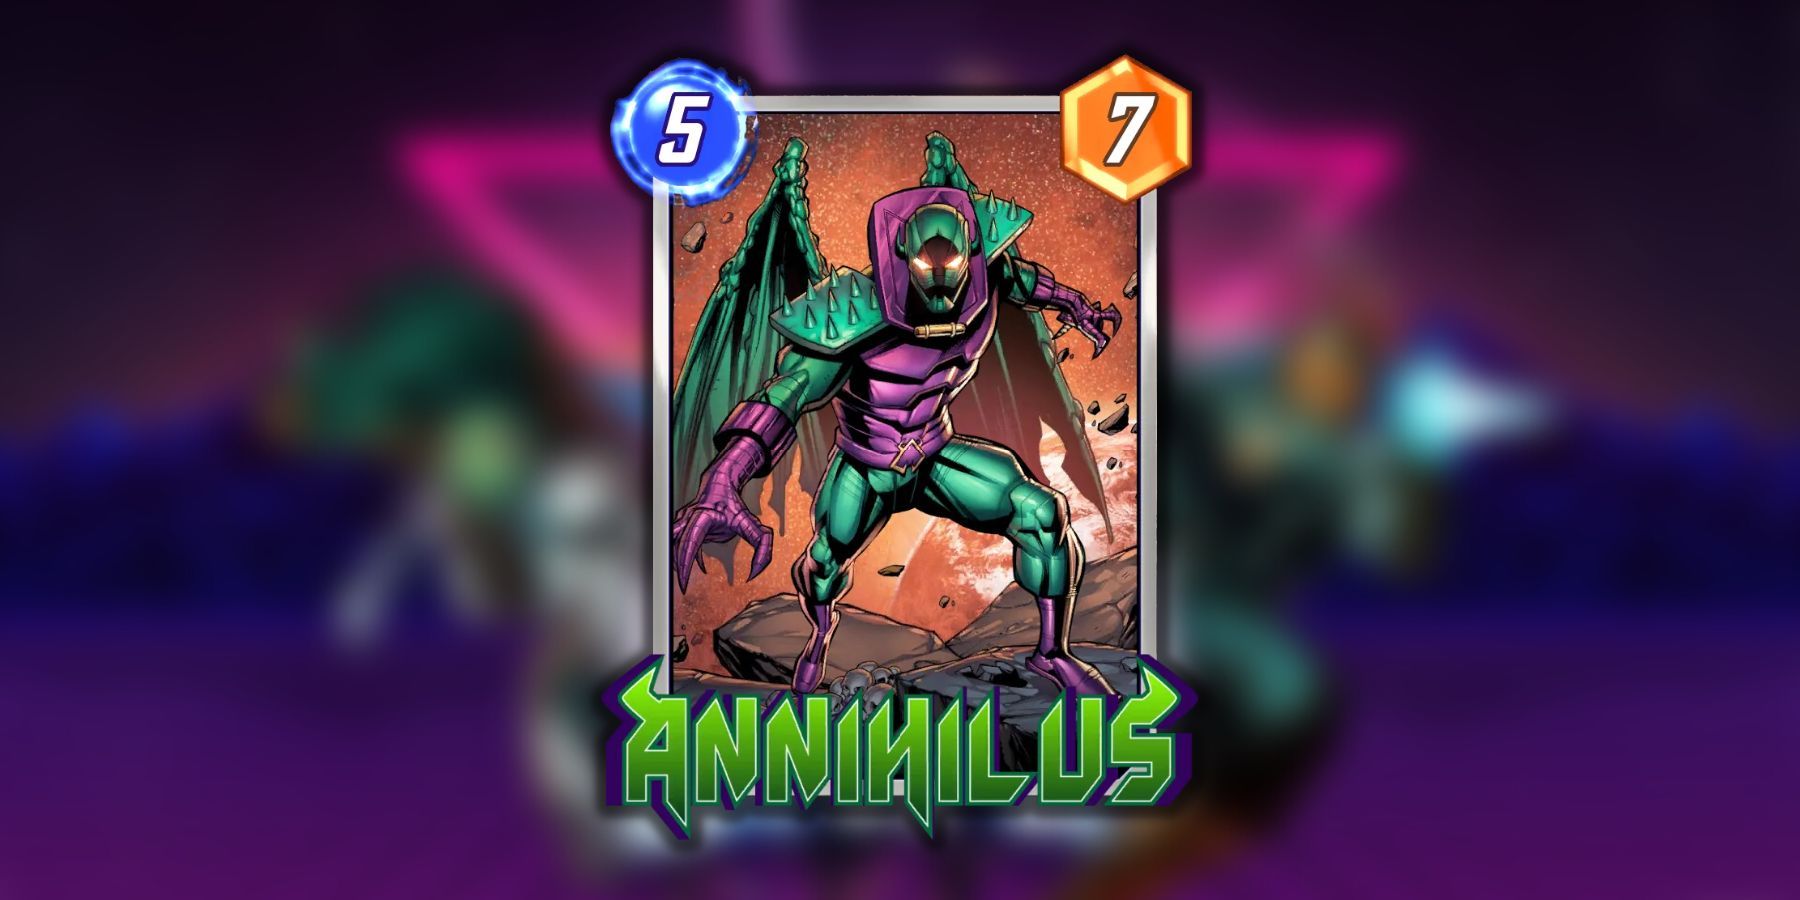 annihilus card in marvel snap.